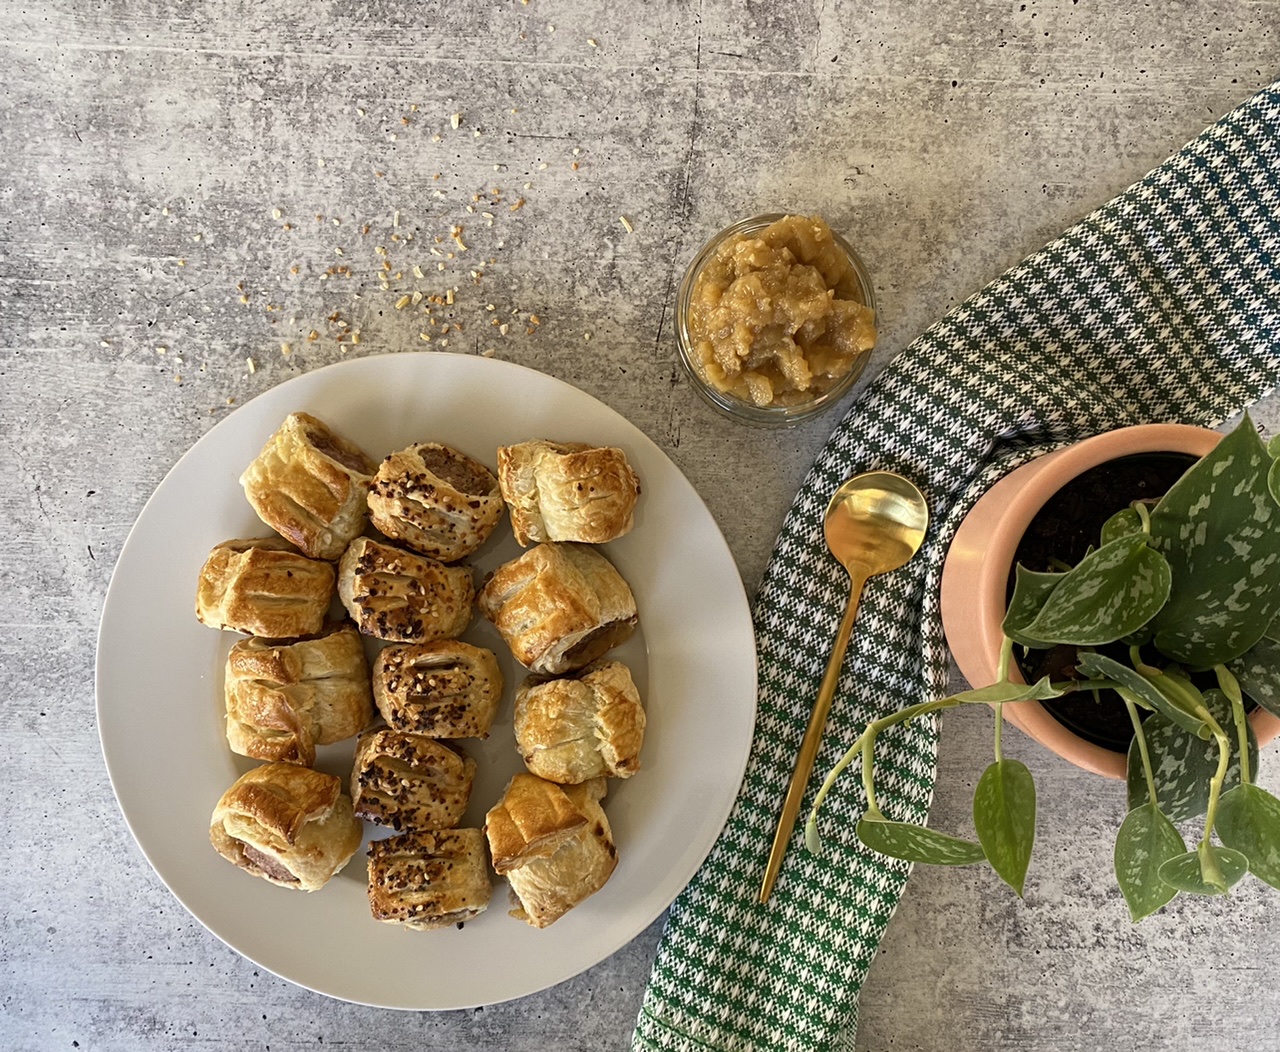 36DAEAF2 172C 432A A587 A1D3CBE443FE - How to Make Sausage Rolls with Apple Chutney